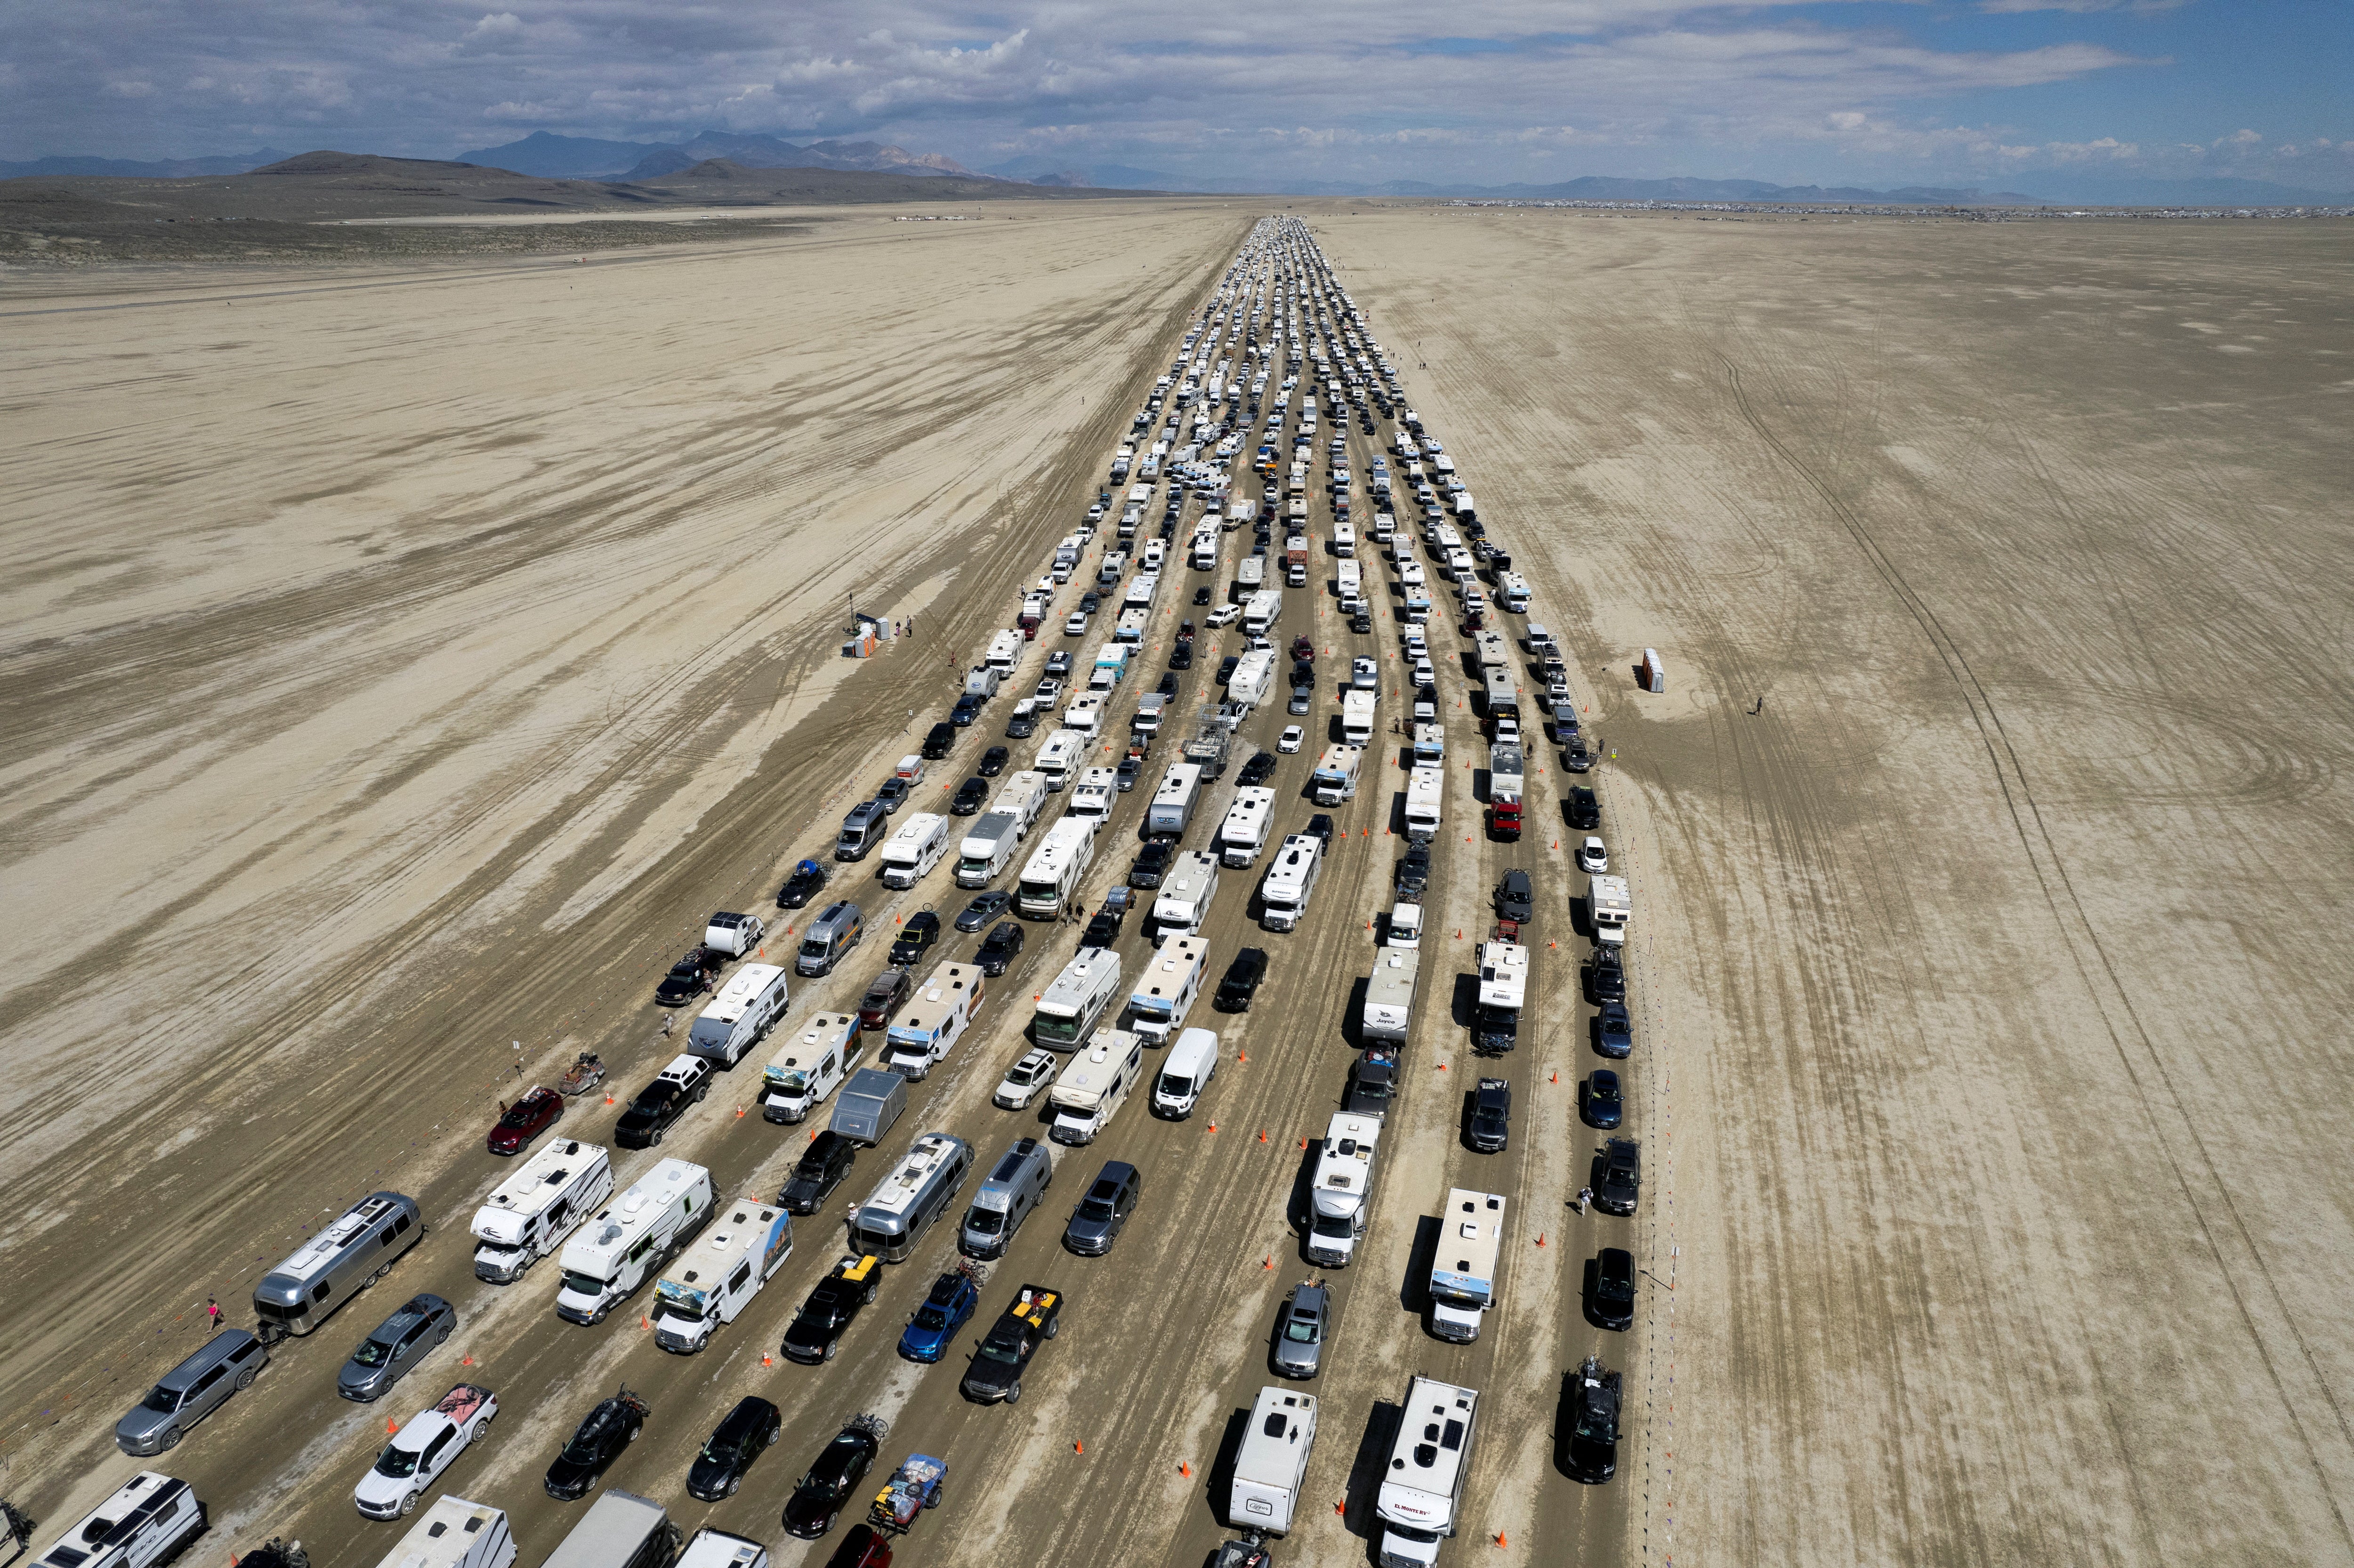 Vehicles are seen departing the Burning Man festival in Black Rock City, Nevada